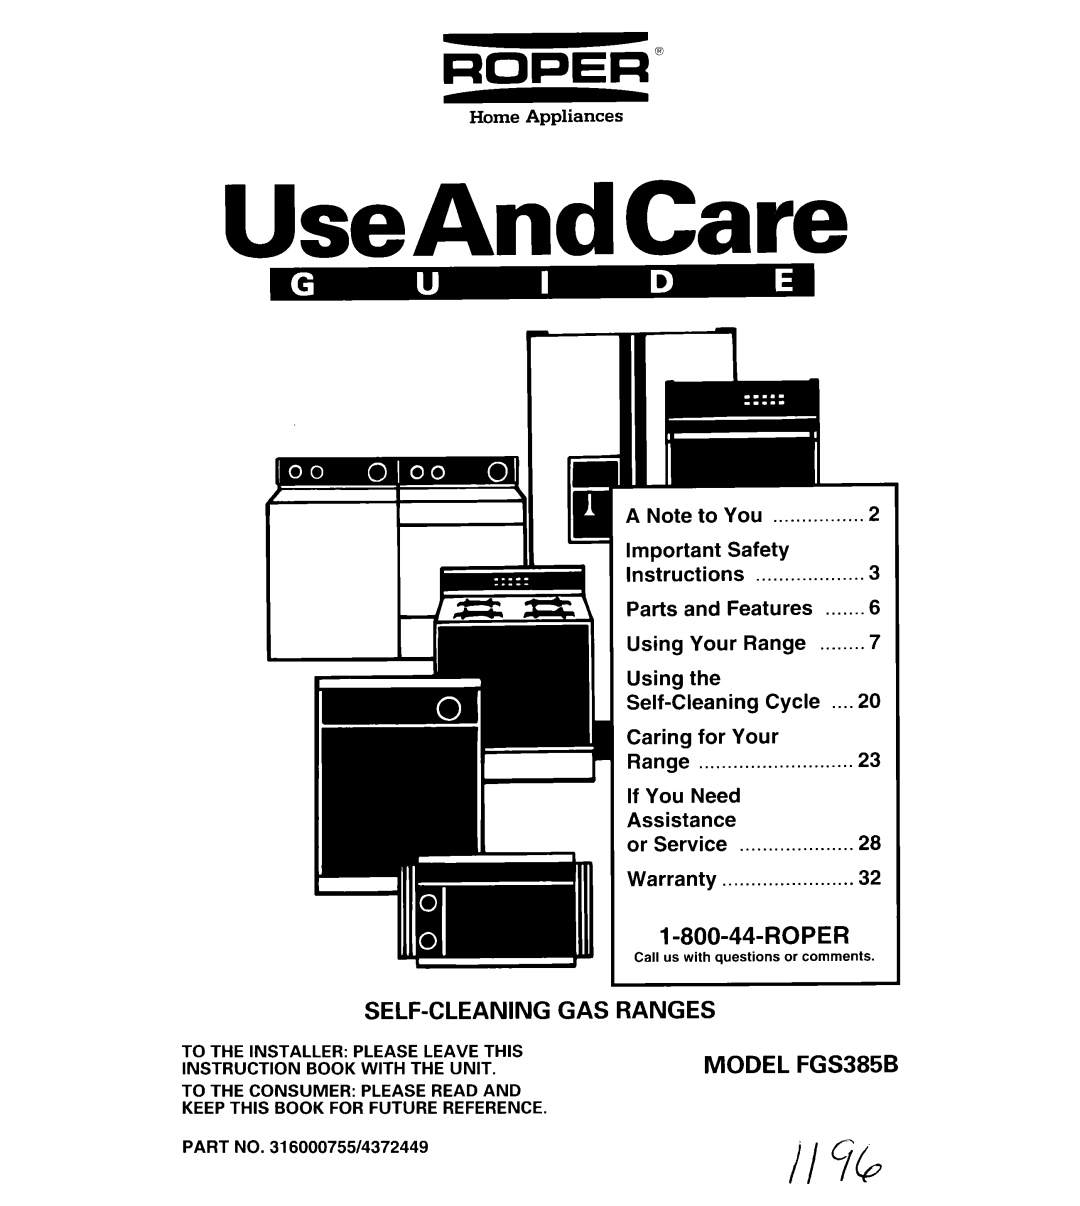 Whirlpool important safety instructions UseAndCare, I-800-44-ROPER, GAS RANGES MODEL FGS385B, Self-Cleaning 